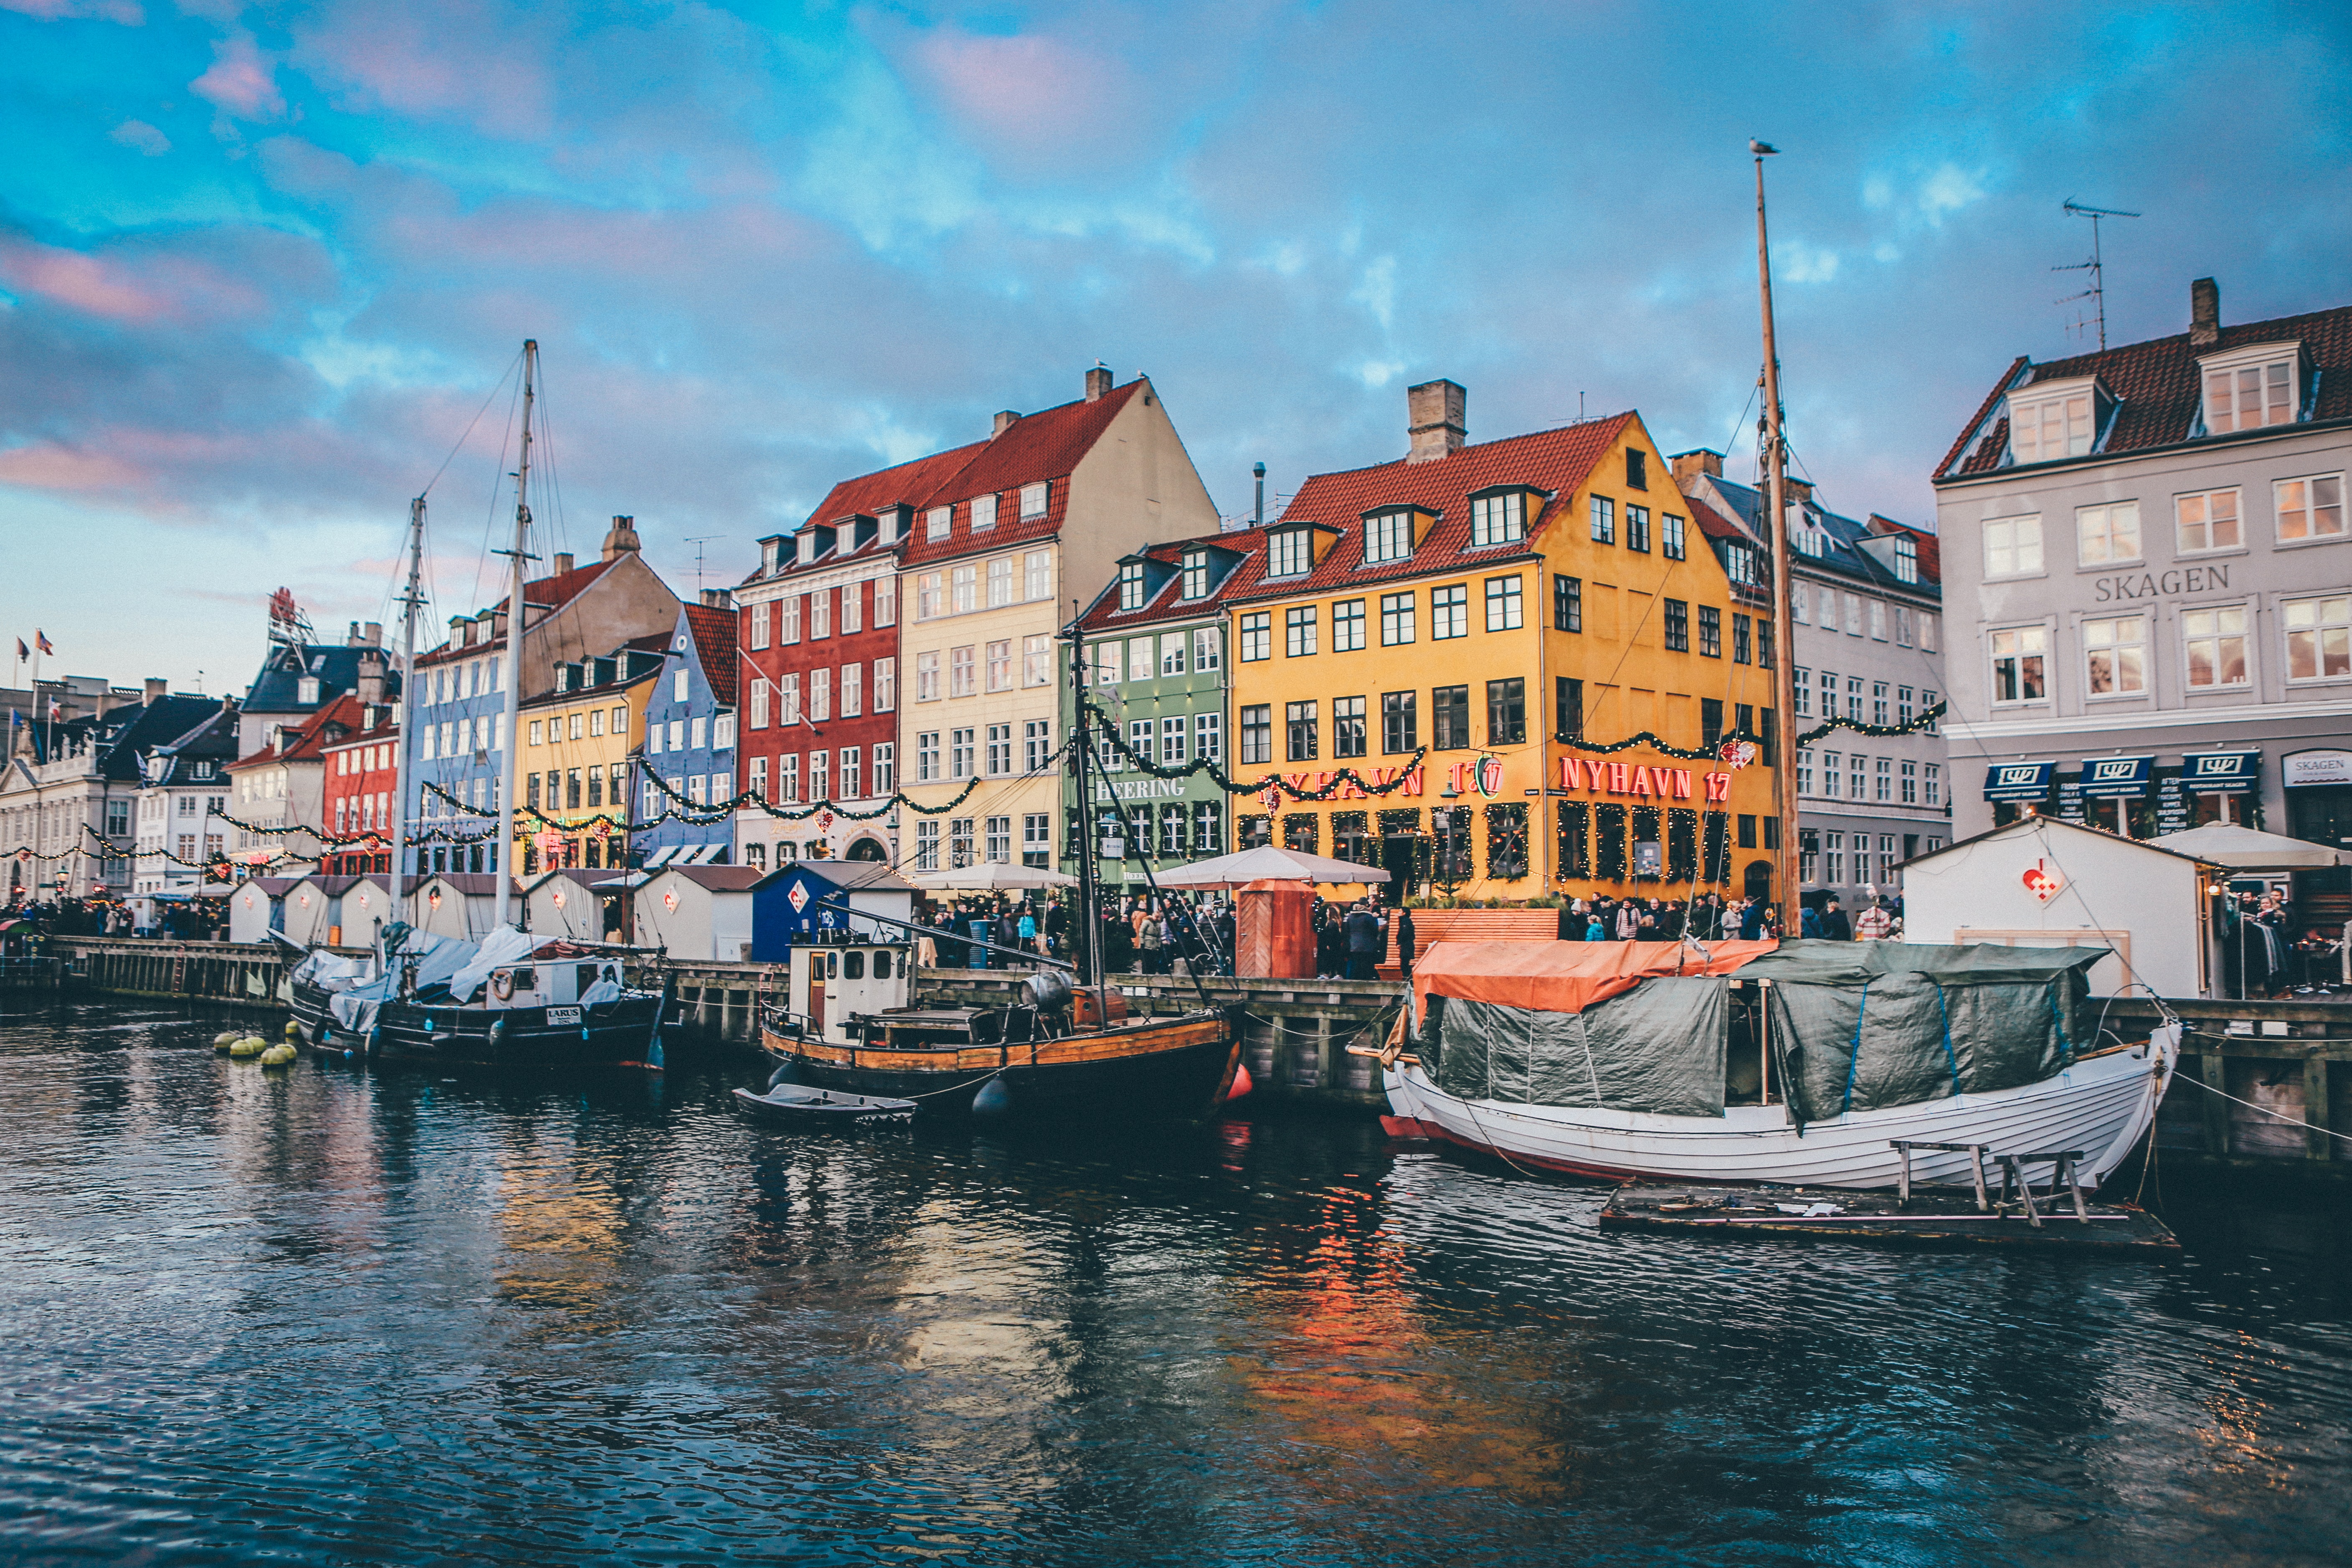 Colorful houses and ships at a canal in Denmark